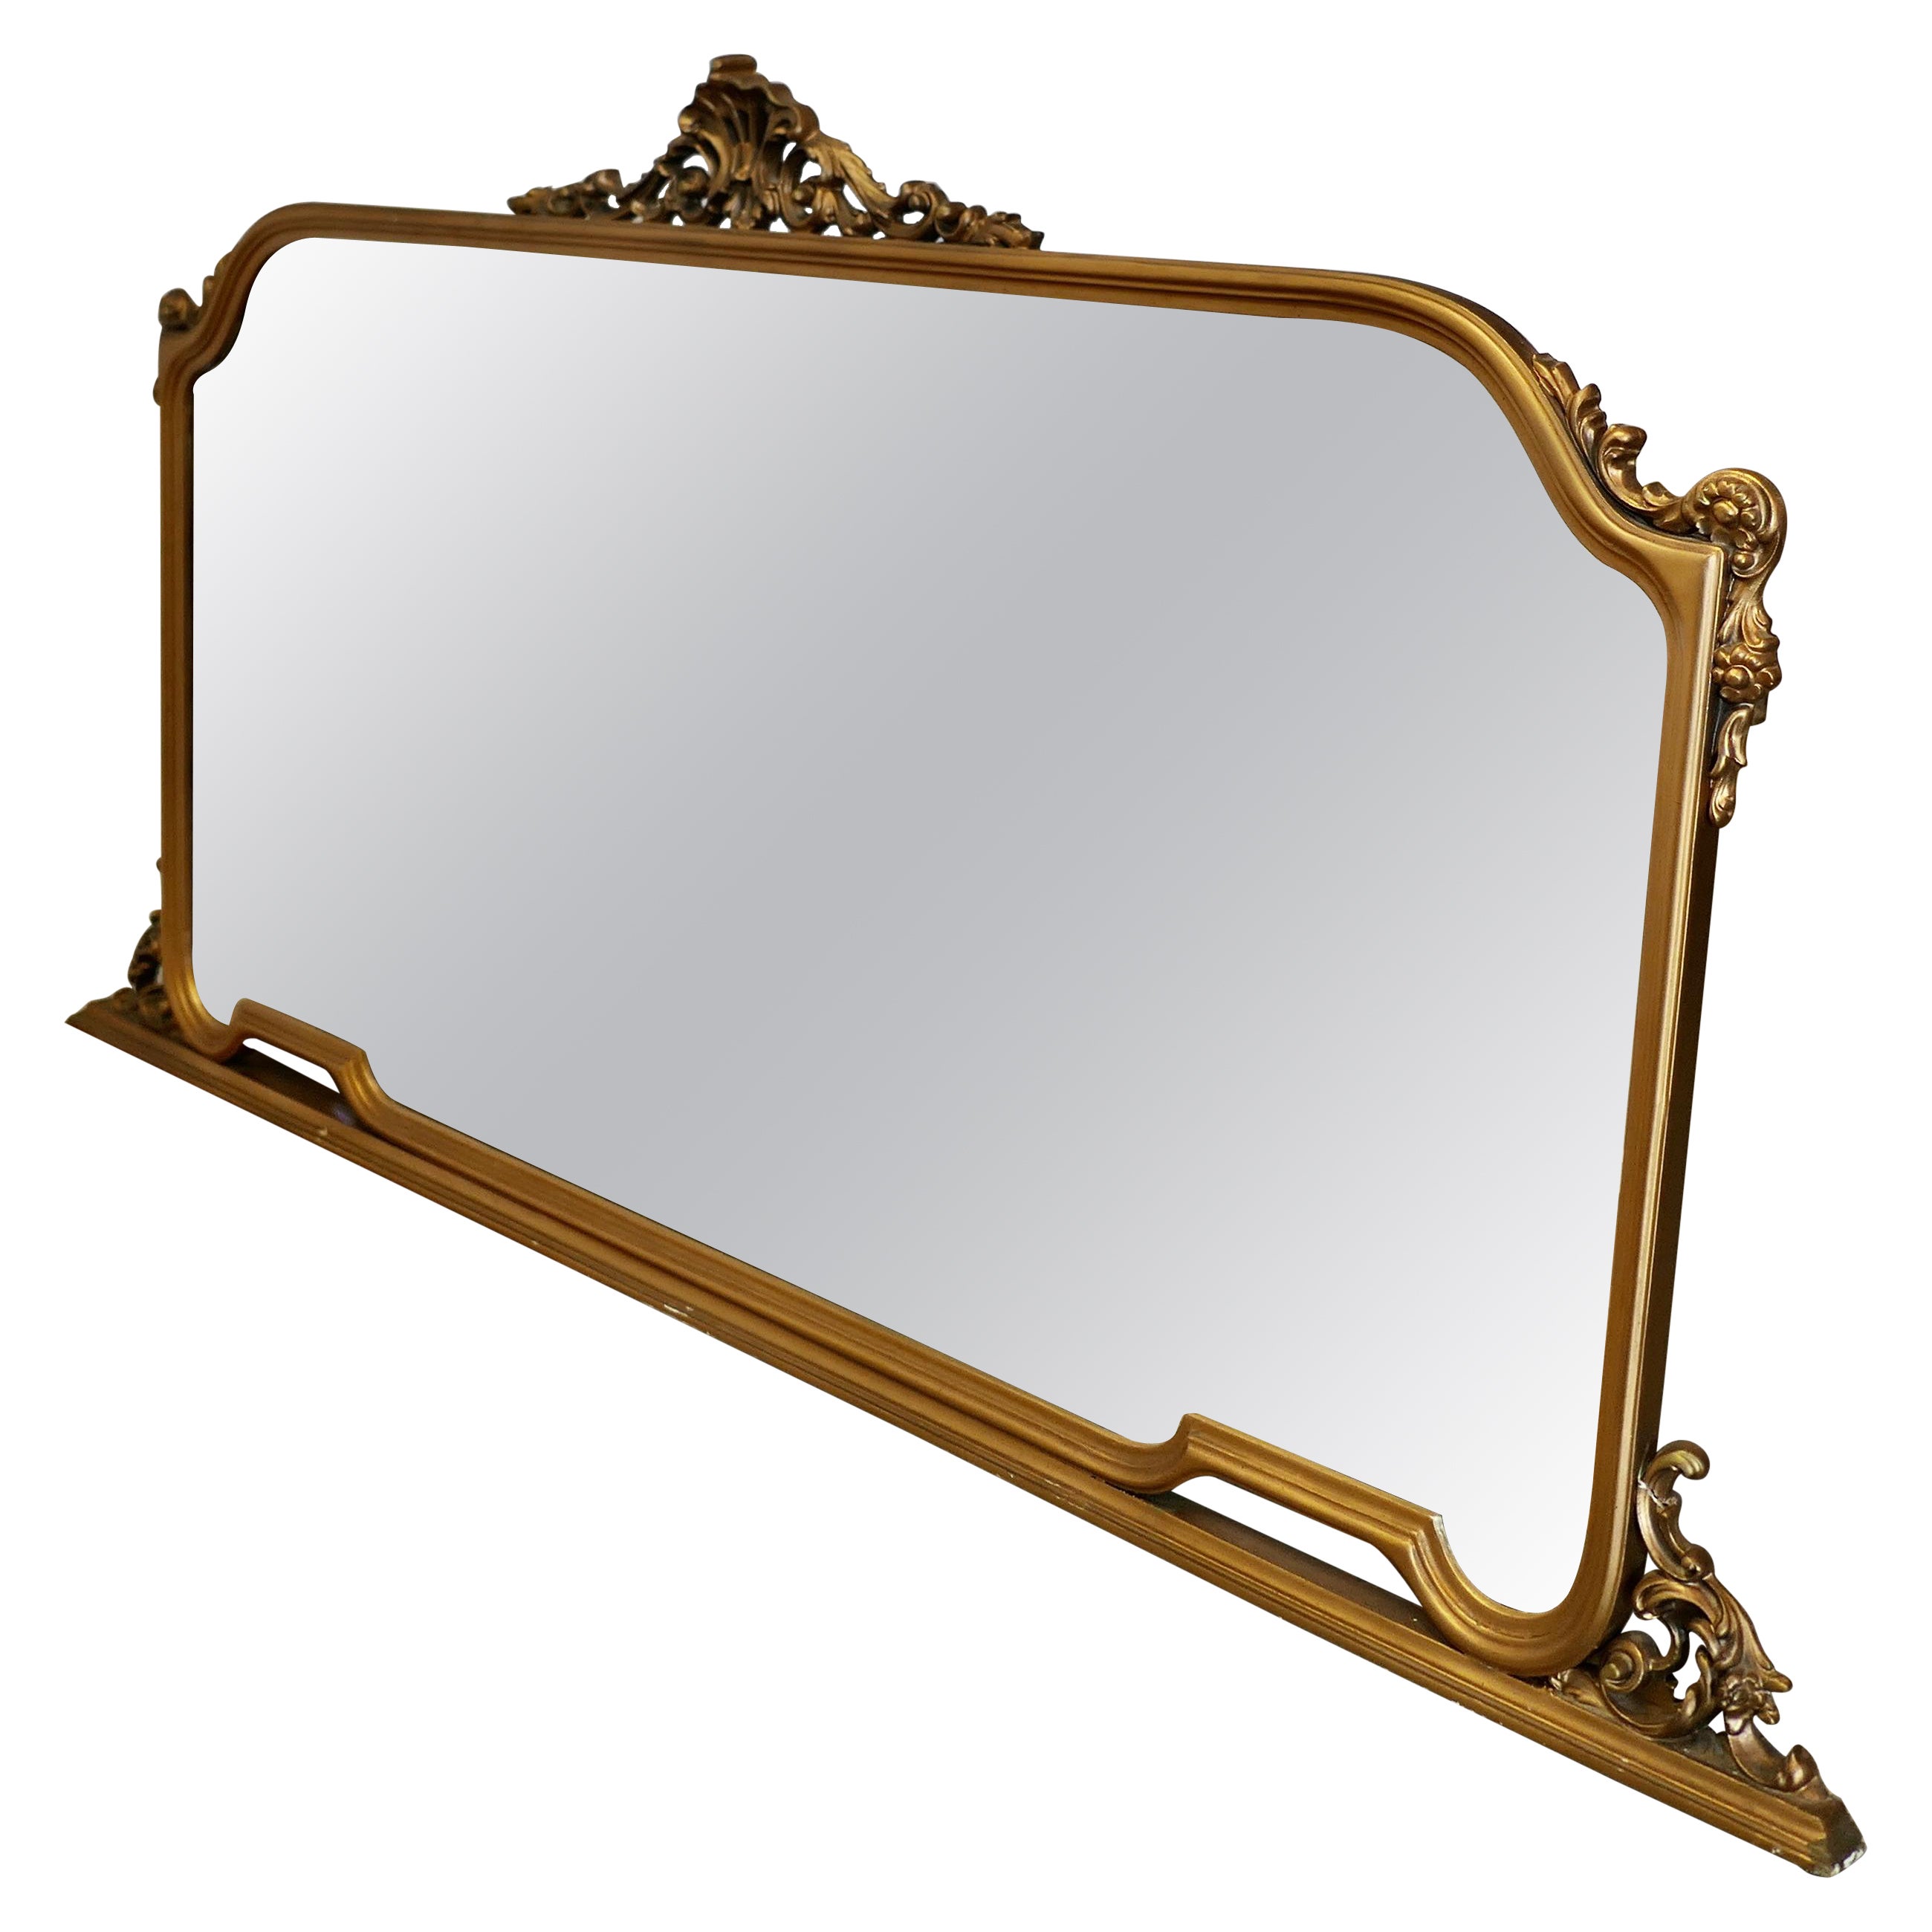 A Large Gilt Over Mantle Mirror    This Mirror has a beautiful Gold Frame   For Sale